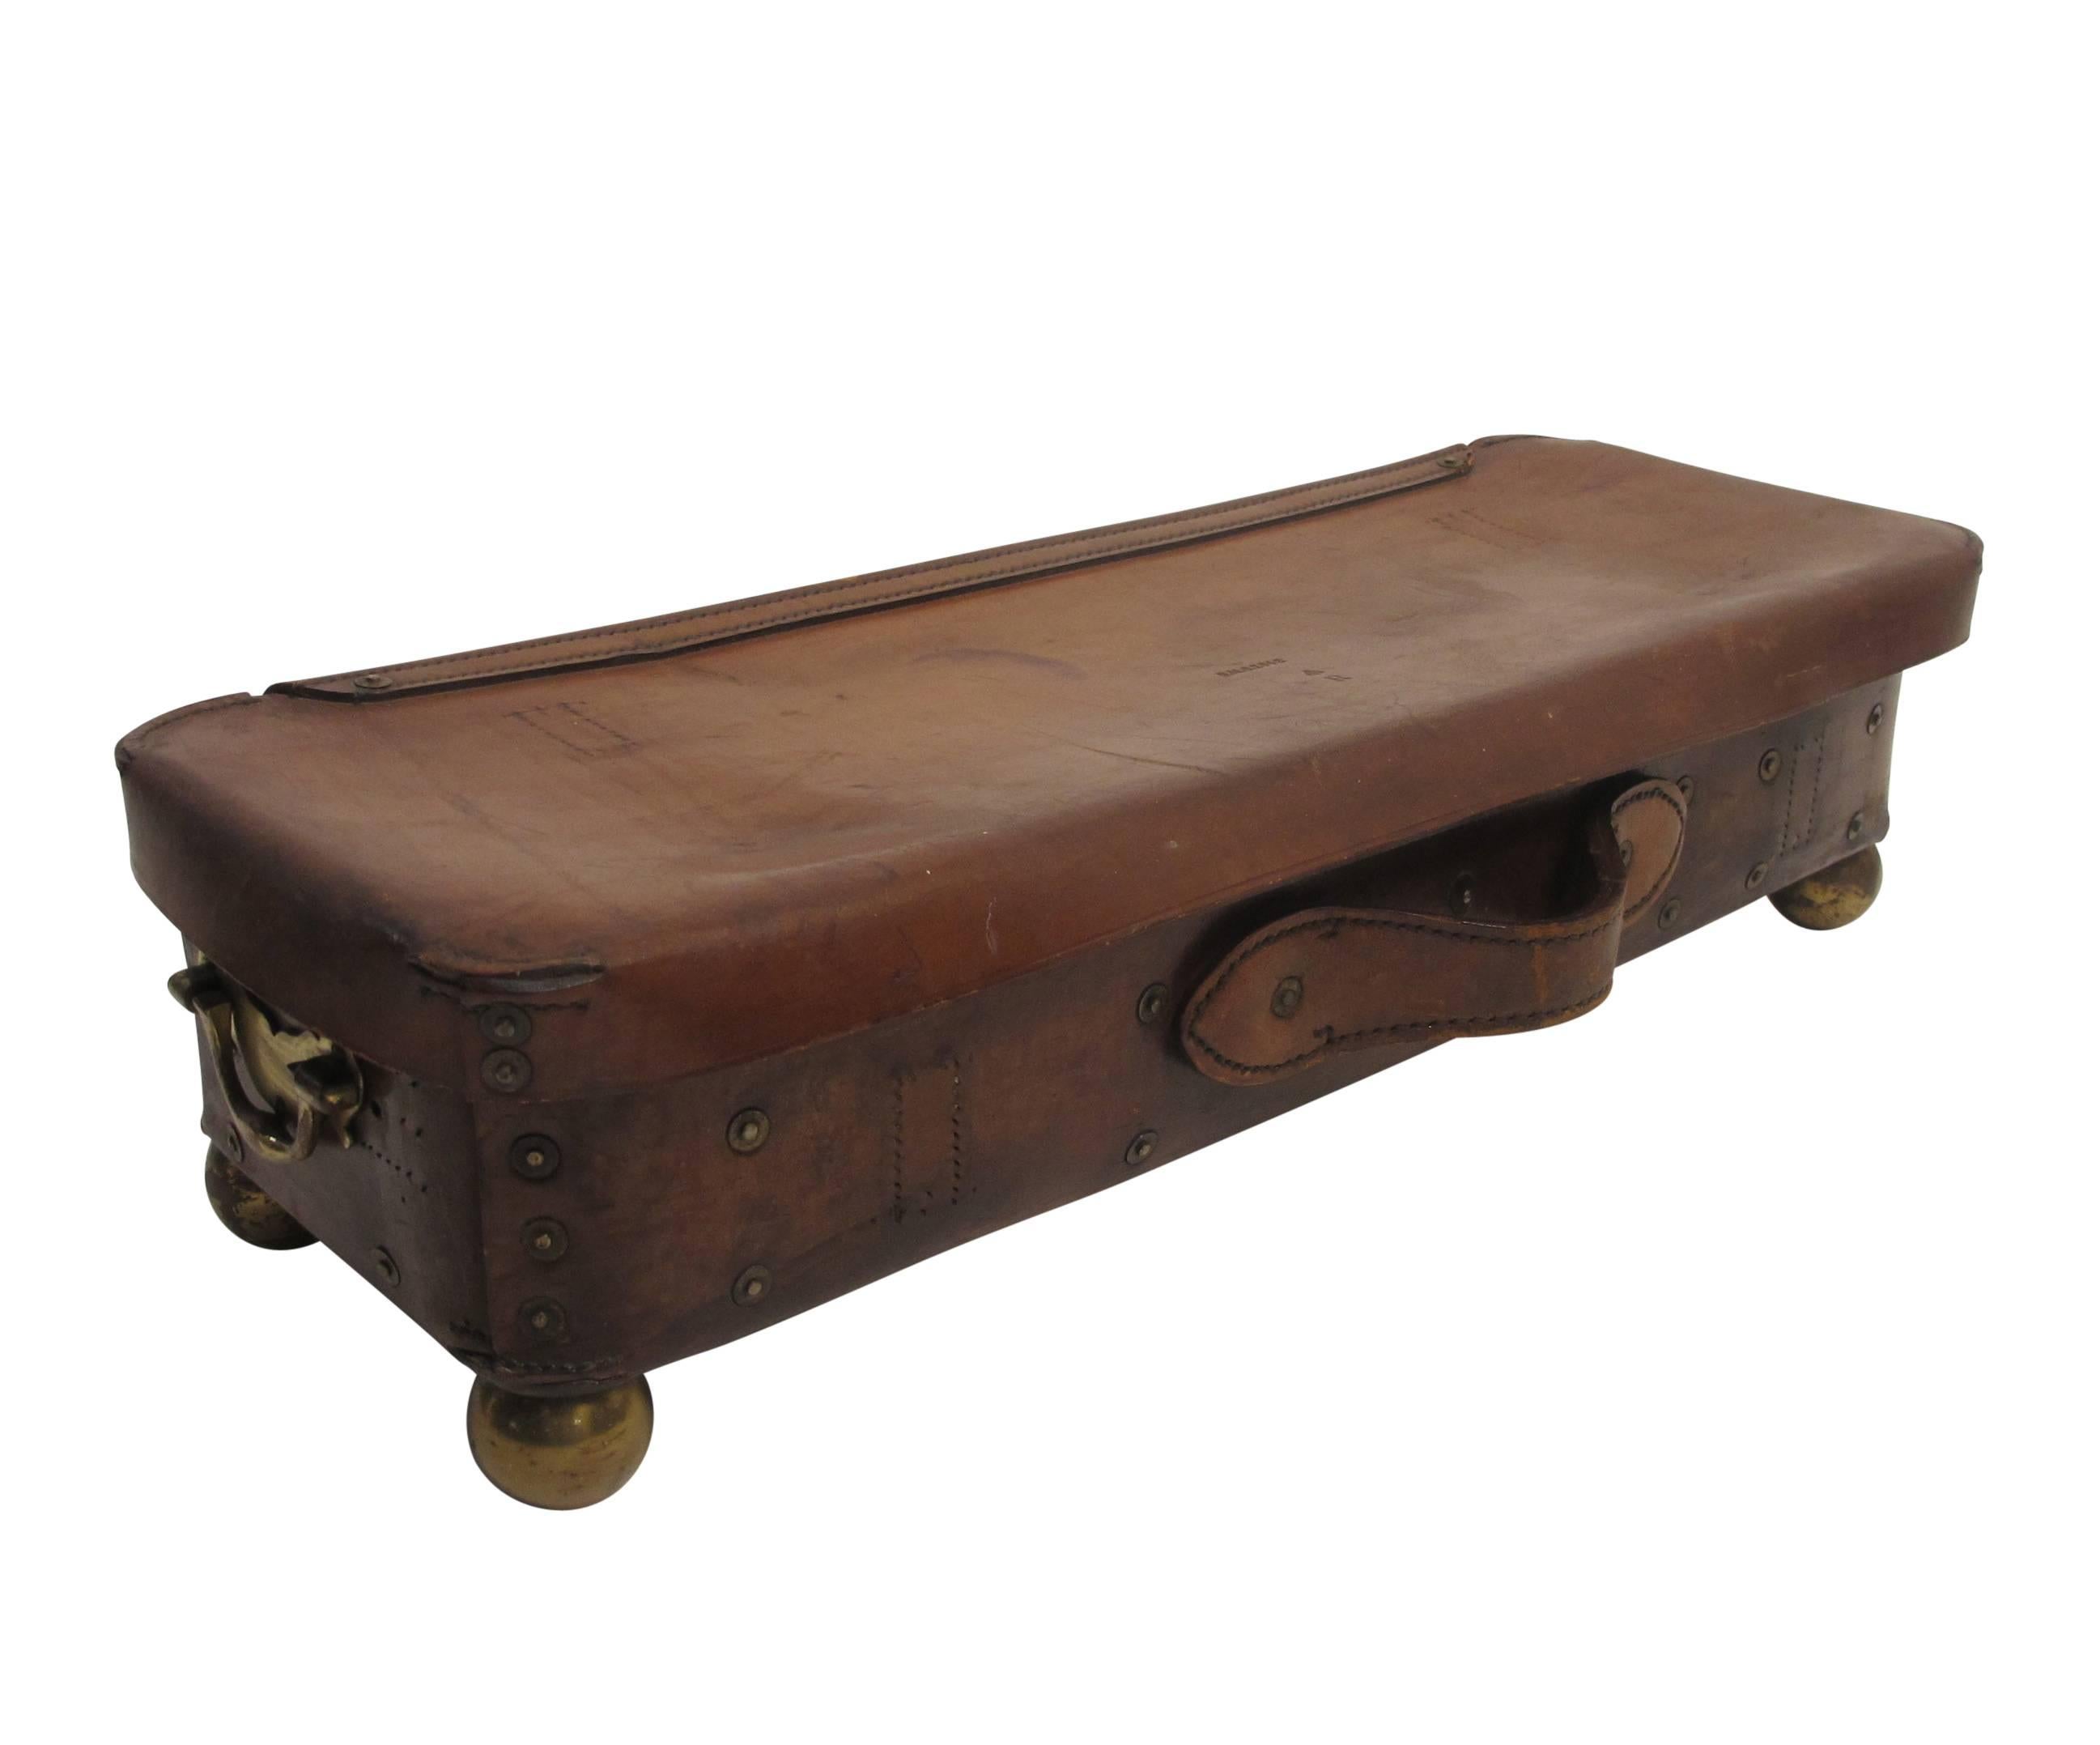 Large handsomely worn leather ammo box with felted interior and brass hardware, antique brass ball feet added at a later date. The interior lid having a monogram with crown, England, late 19th century.